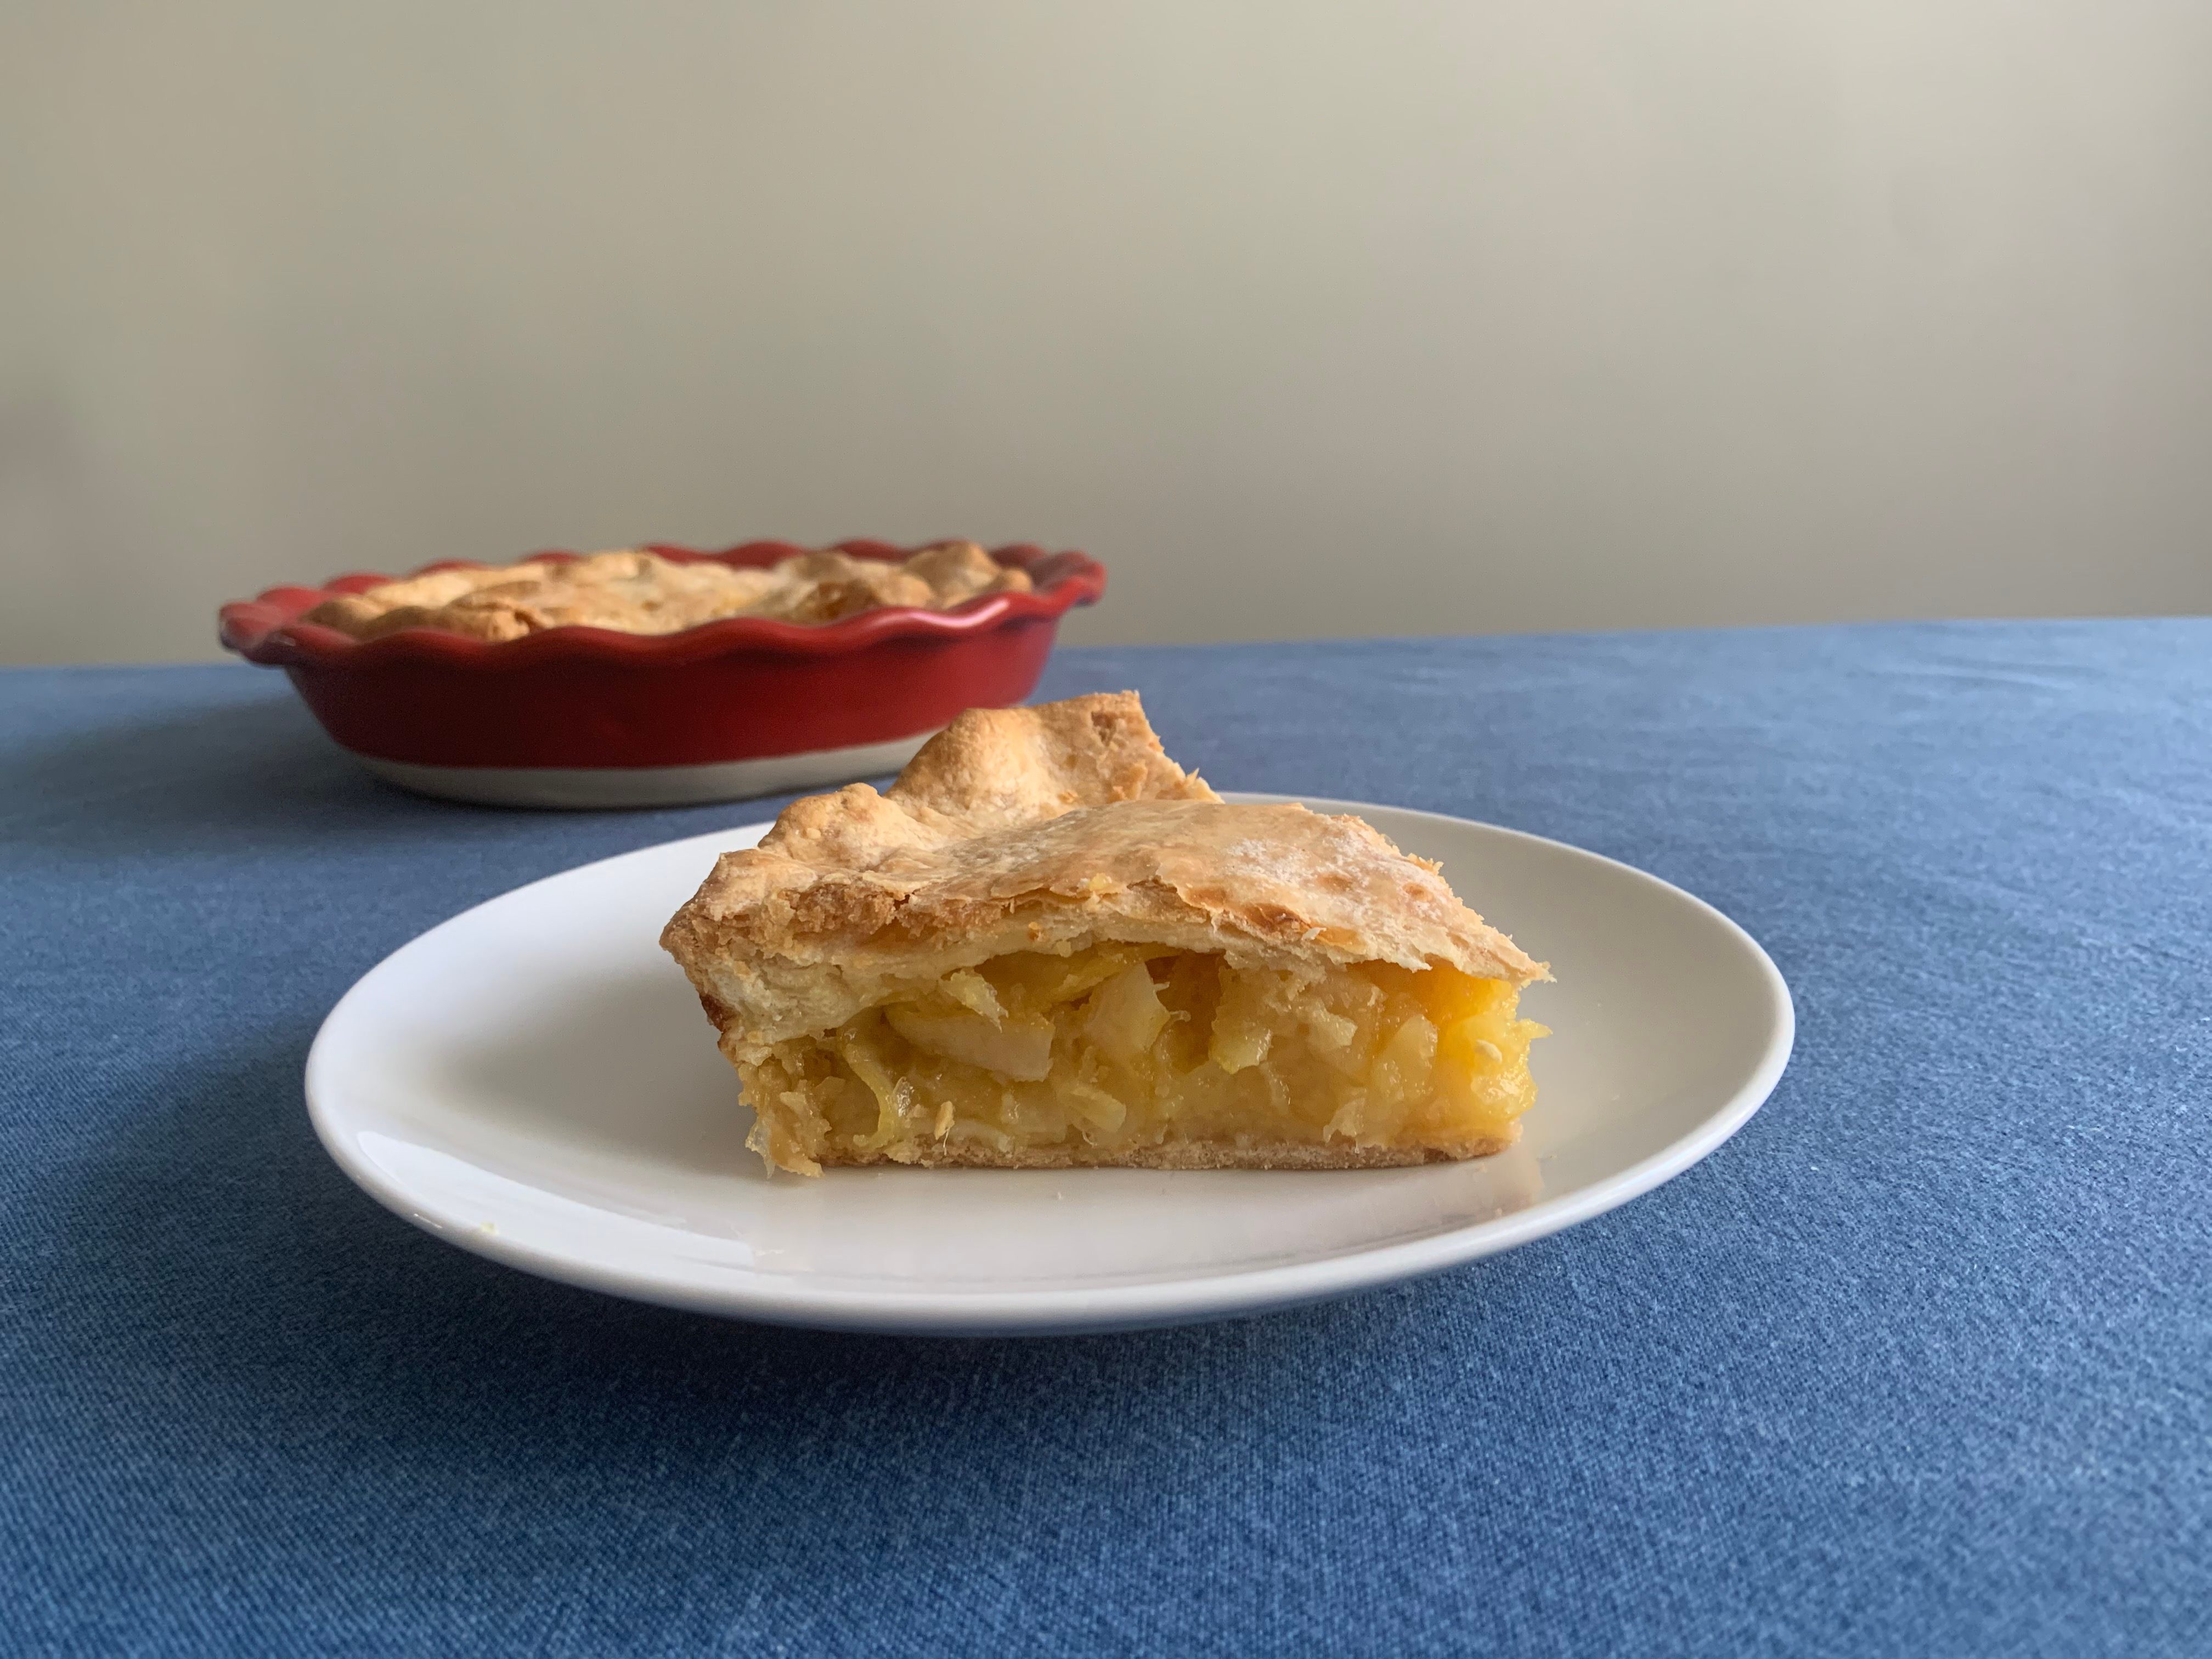 Nothing gets wasted in this sweet-and-sour pie.